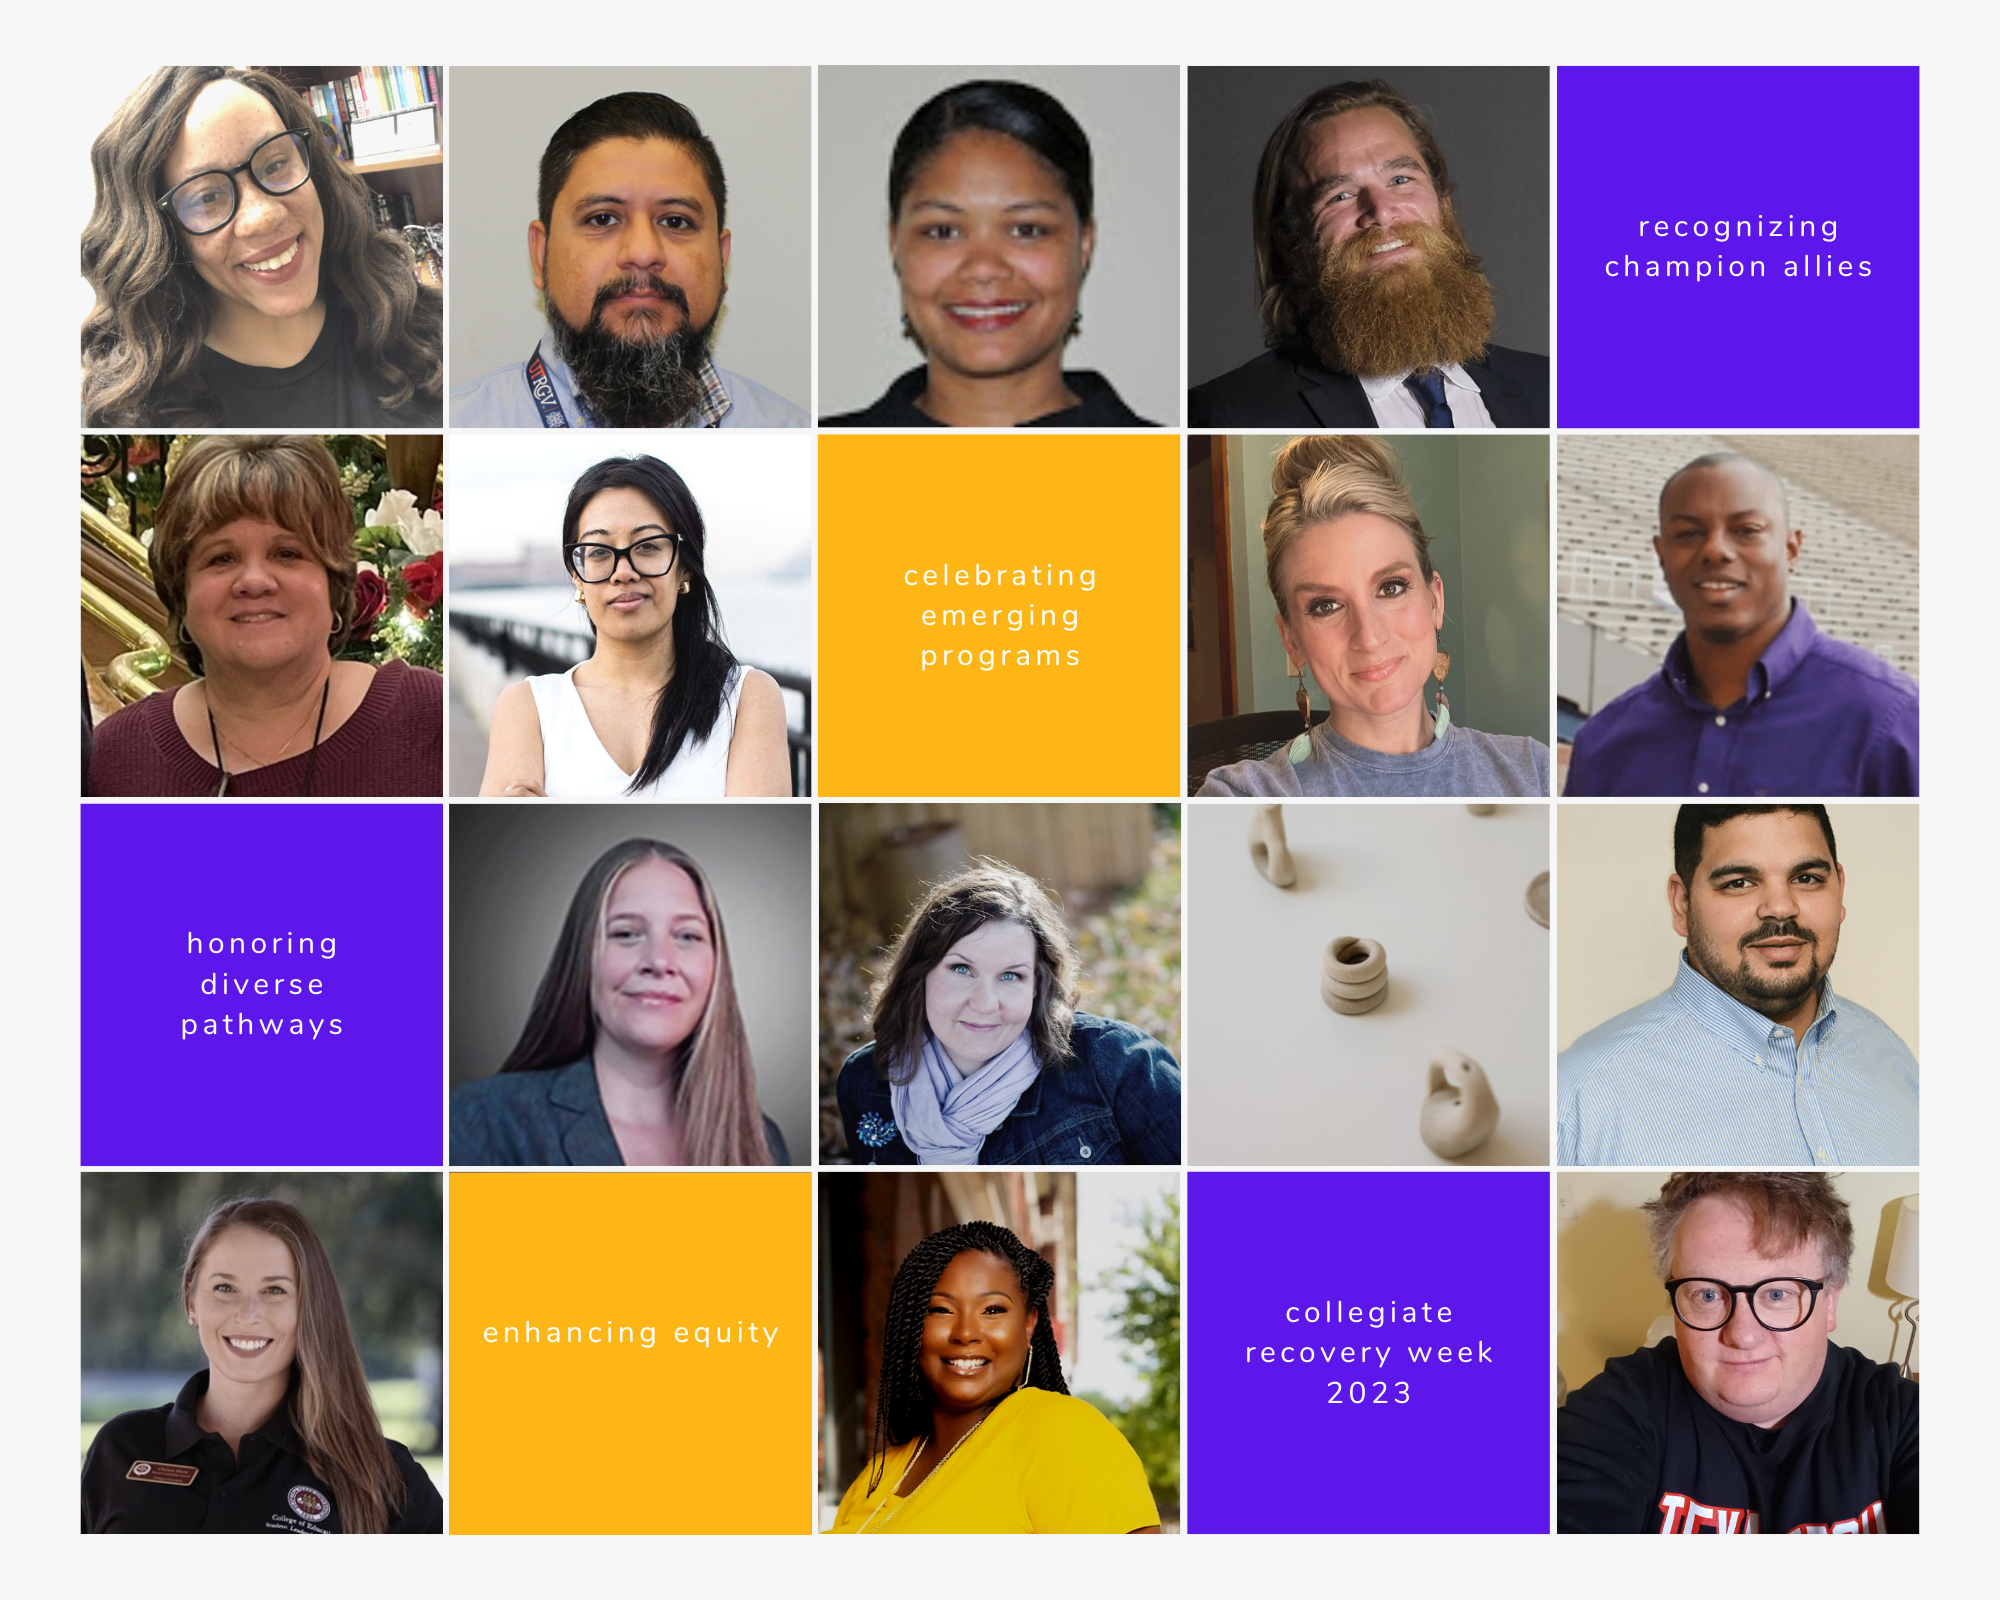 Image composite with people's faces who submitted quotes for why they celebrate collegiate recovery week.